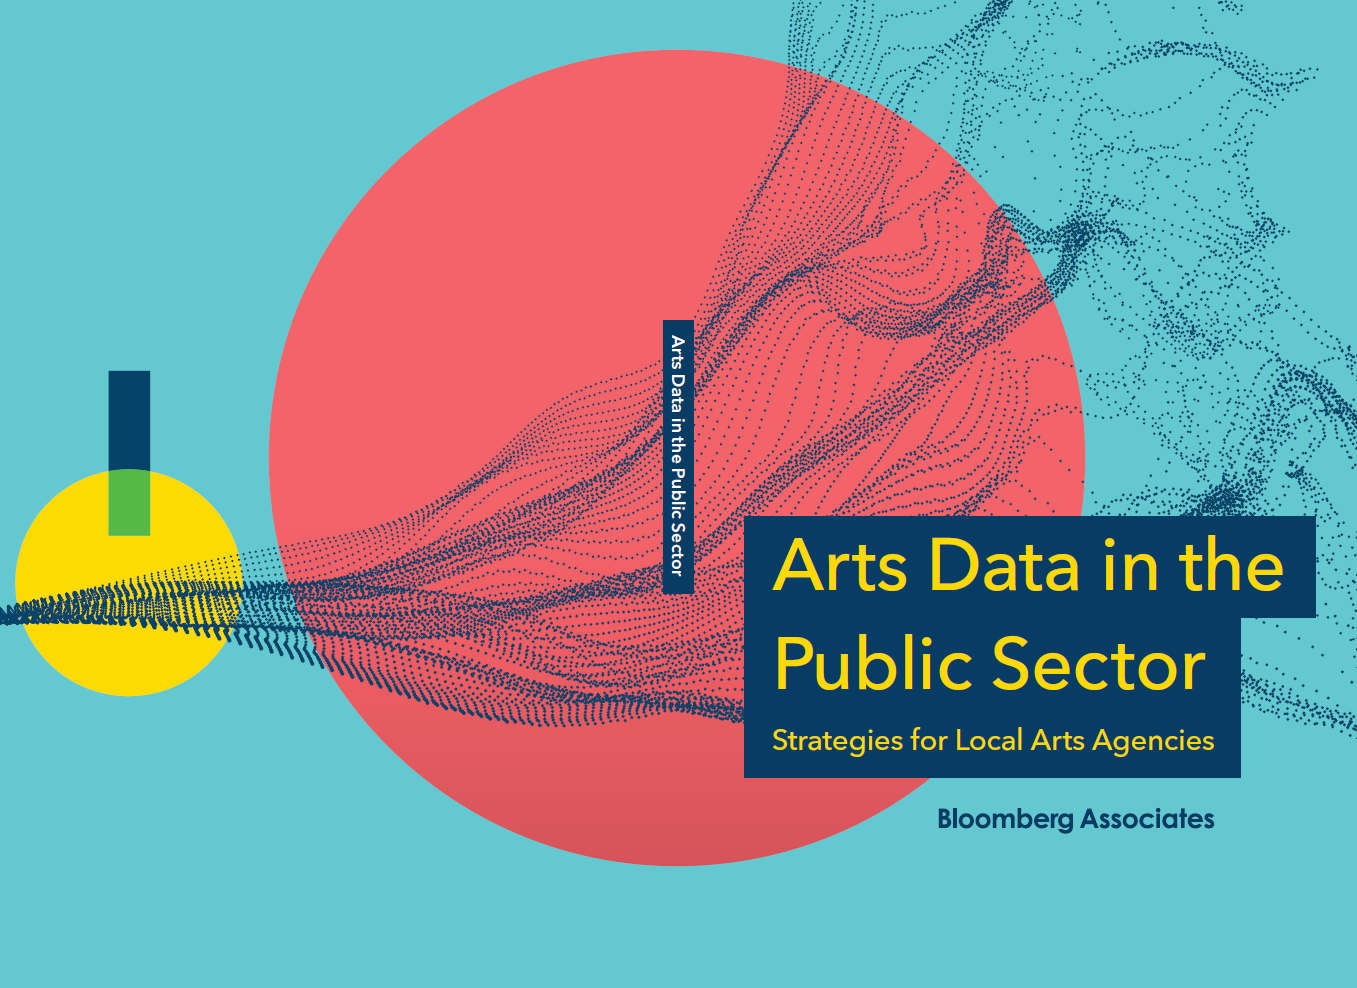 Arts Data in the Public Sector Report